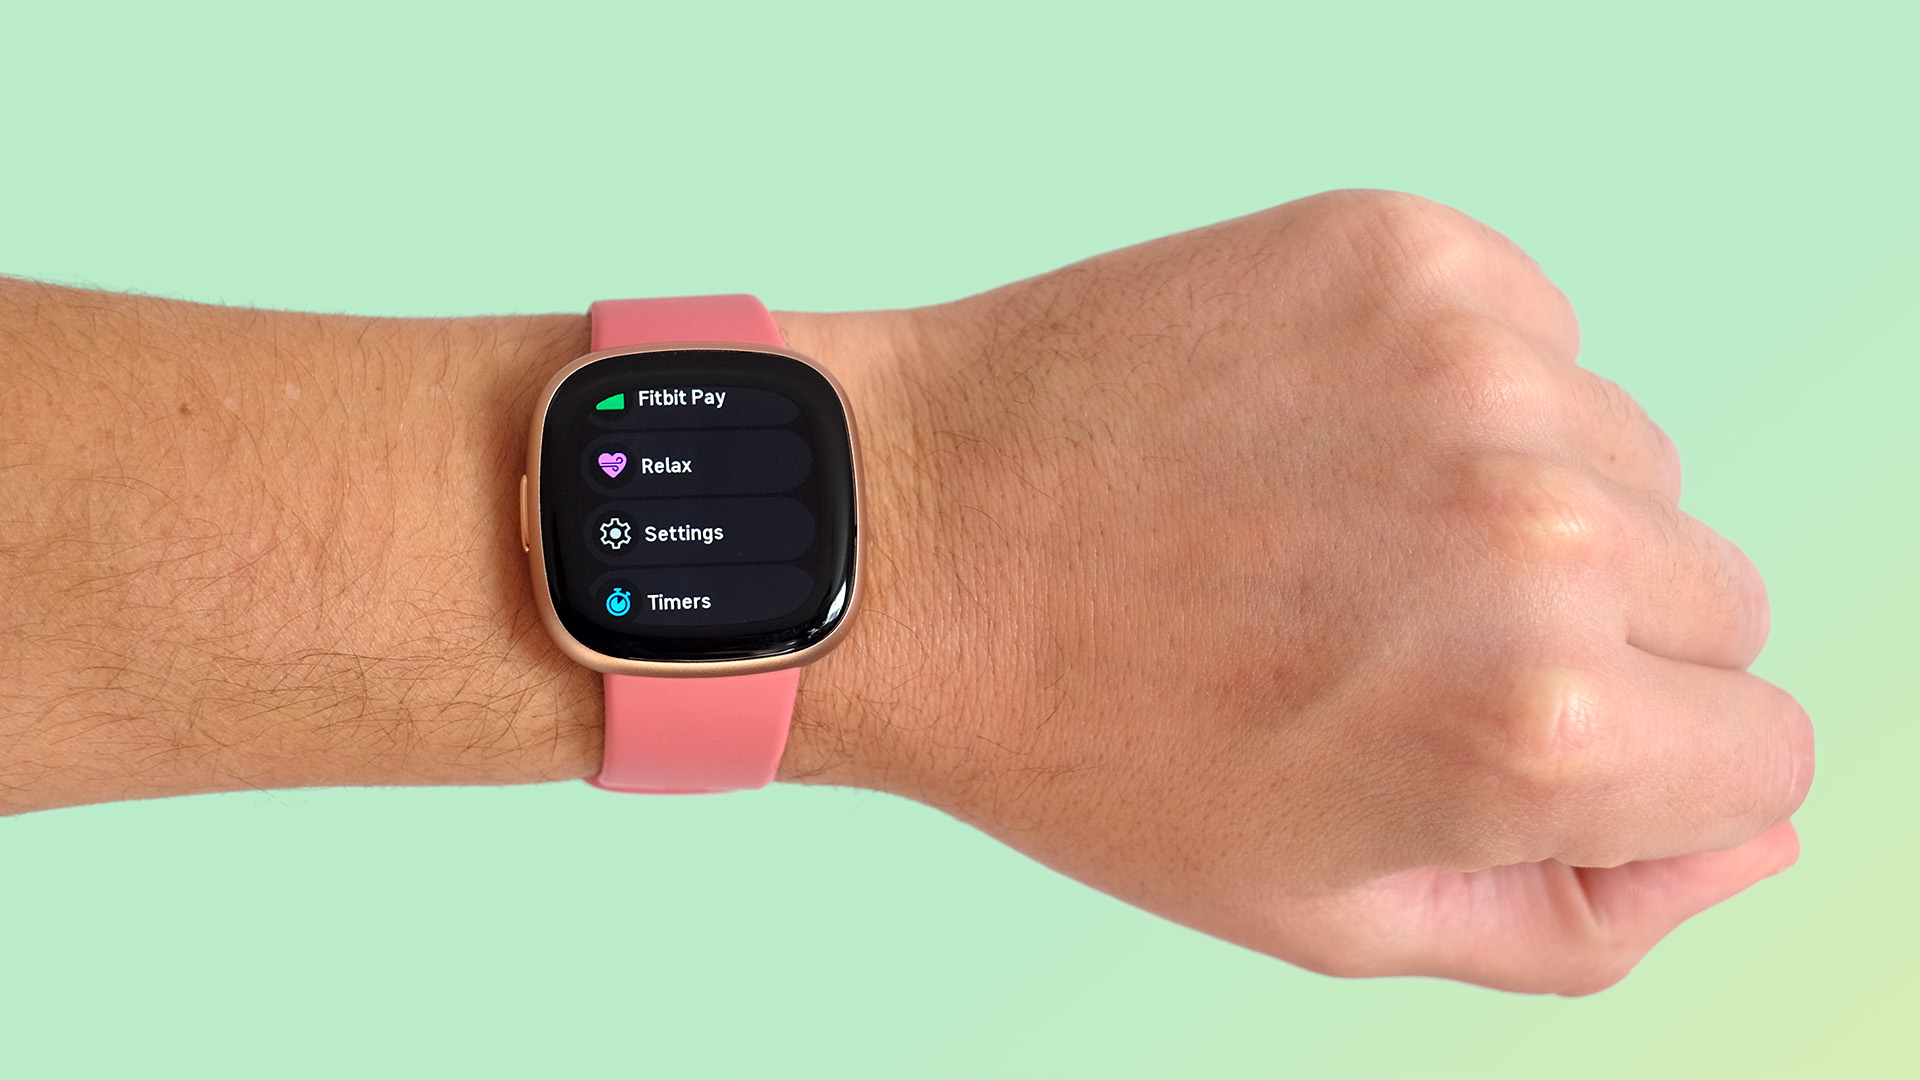 App Acquisition: A Step-by-Step Guide To Downloading The Fitbit App